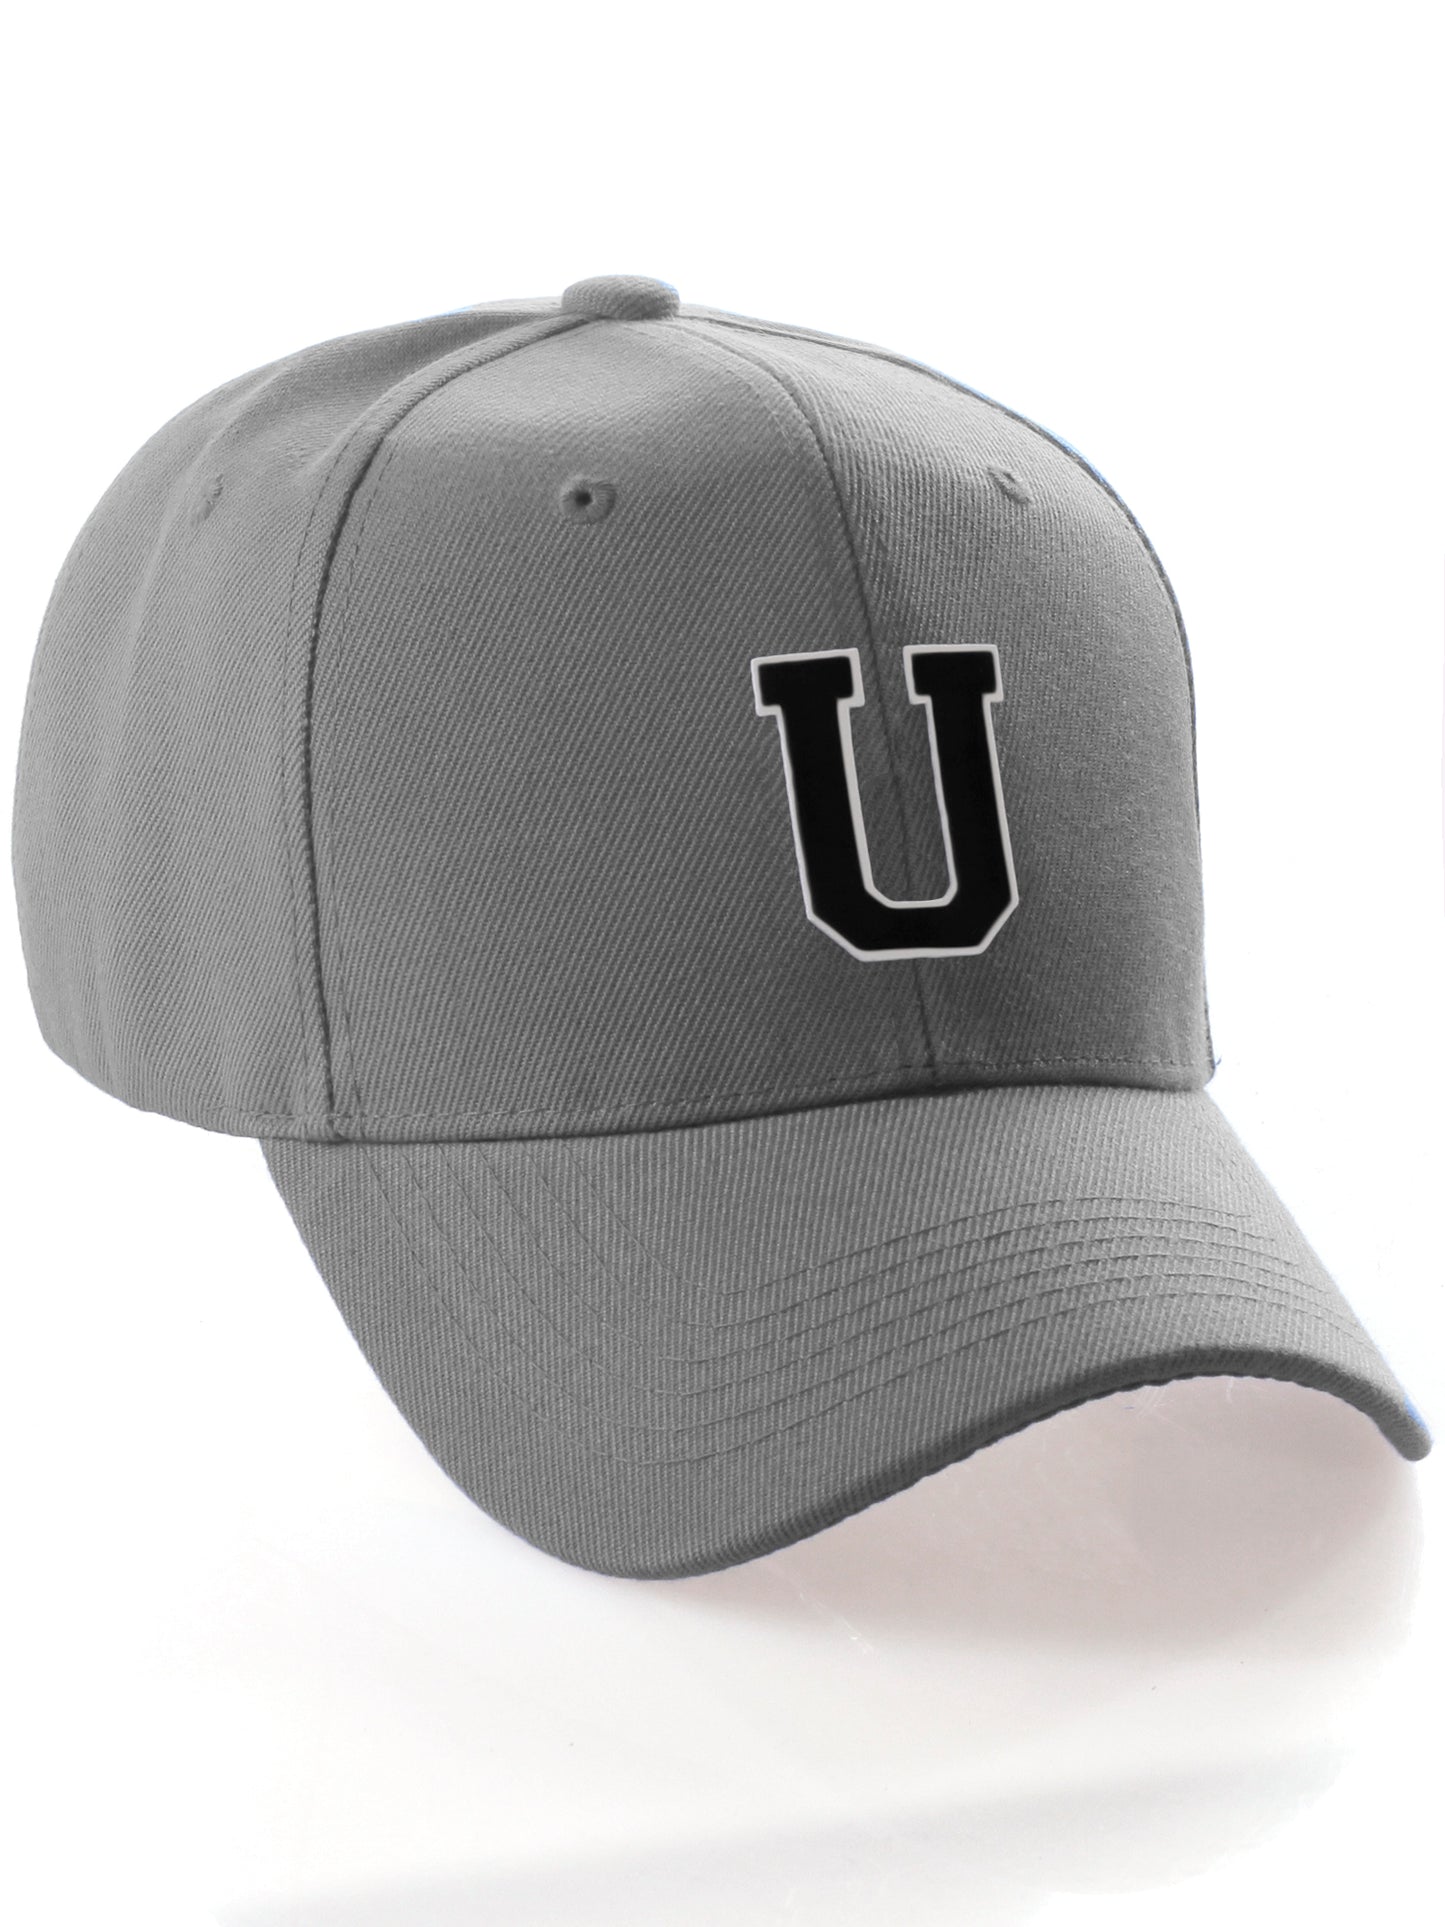 Classic Baseball Hat Custom A to Z Initial Team Letter, Charcoal Cap White Black